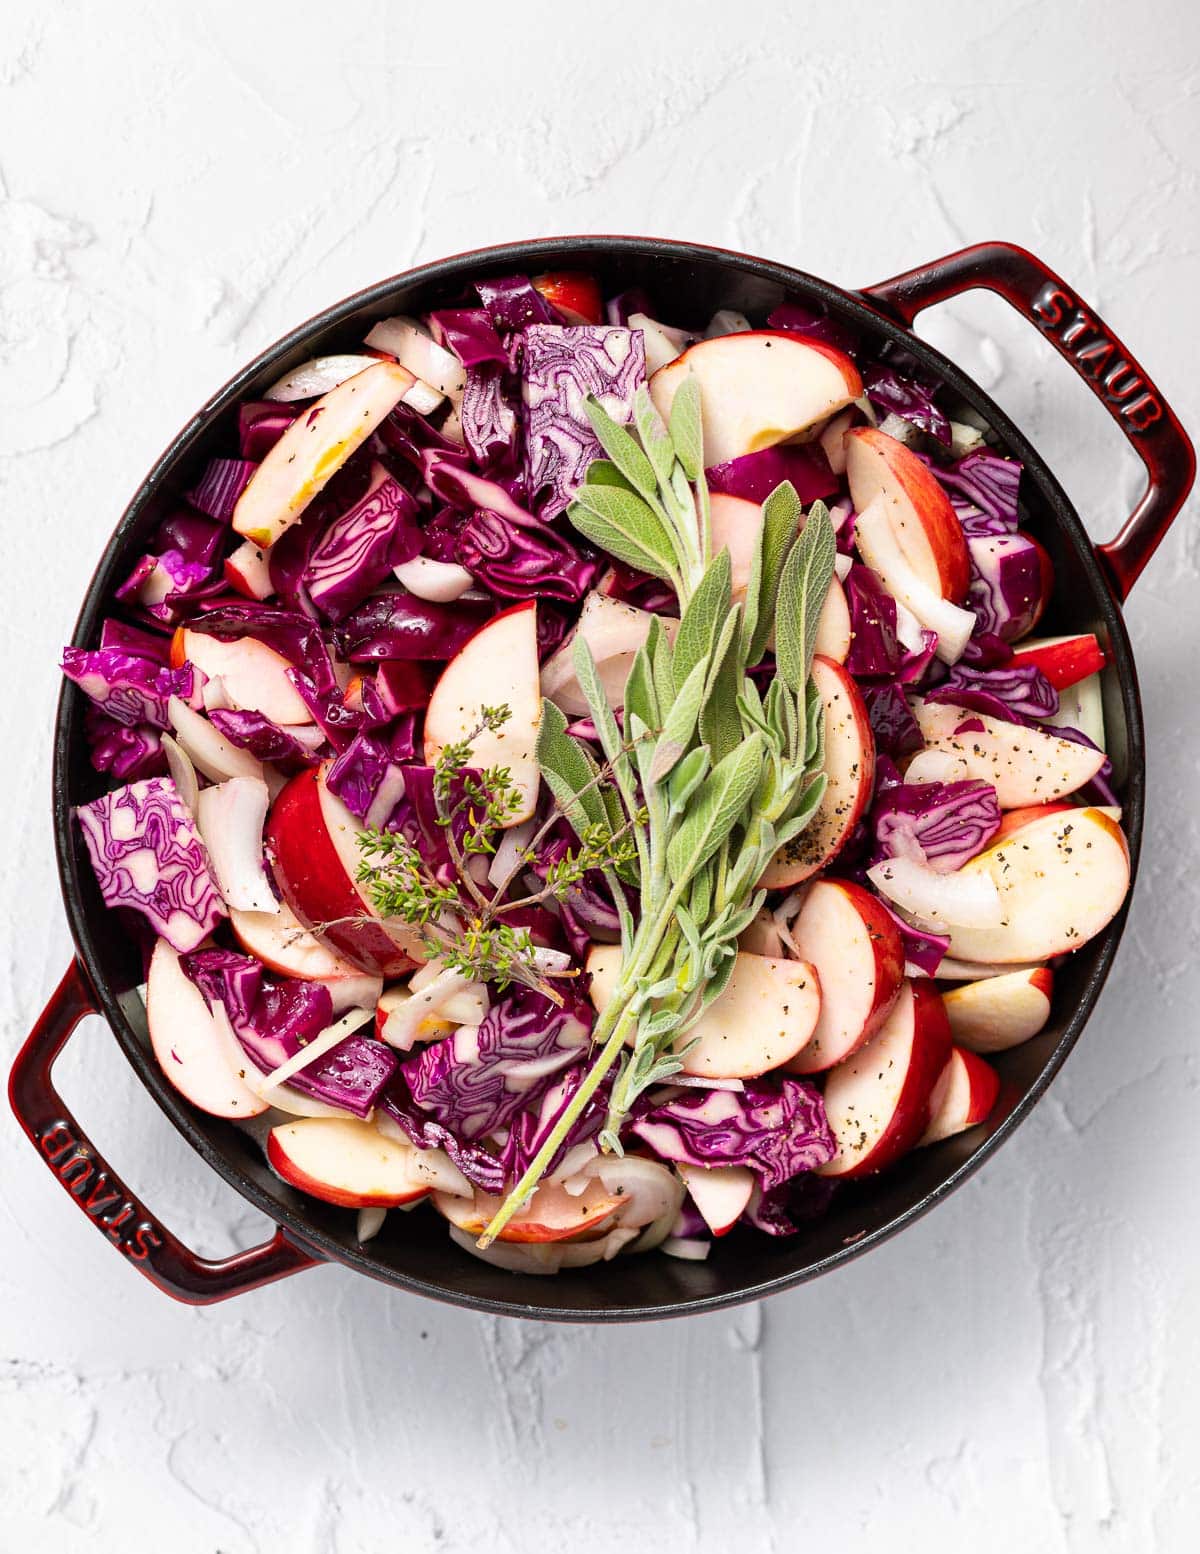 red cabbage, apples and herbs in a skillet